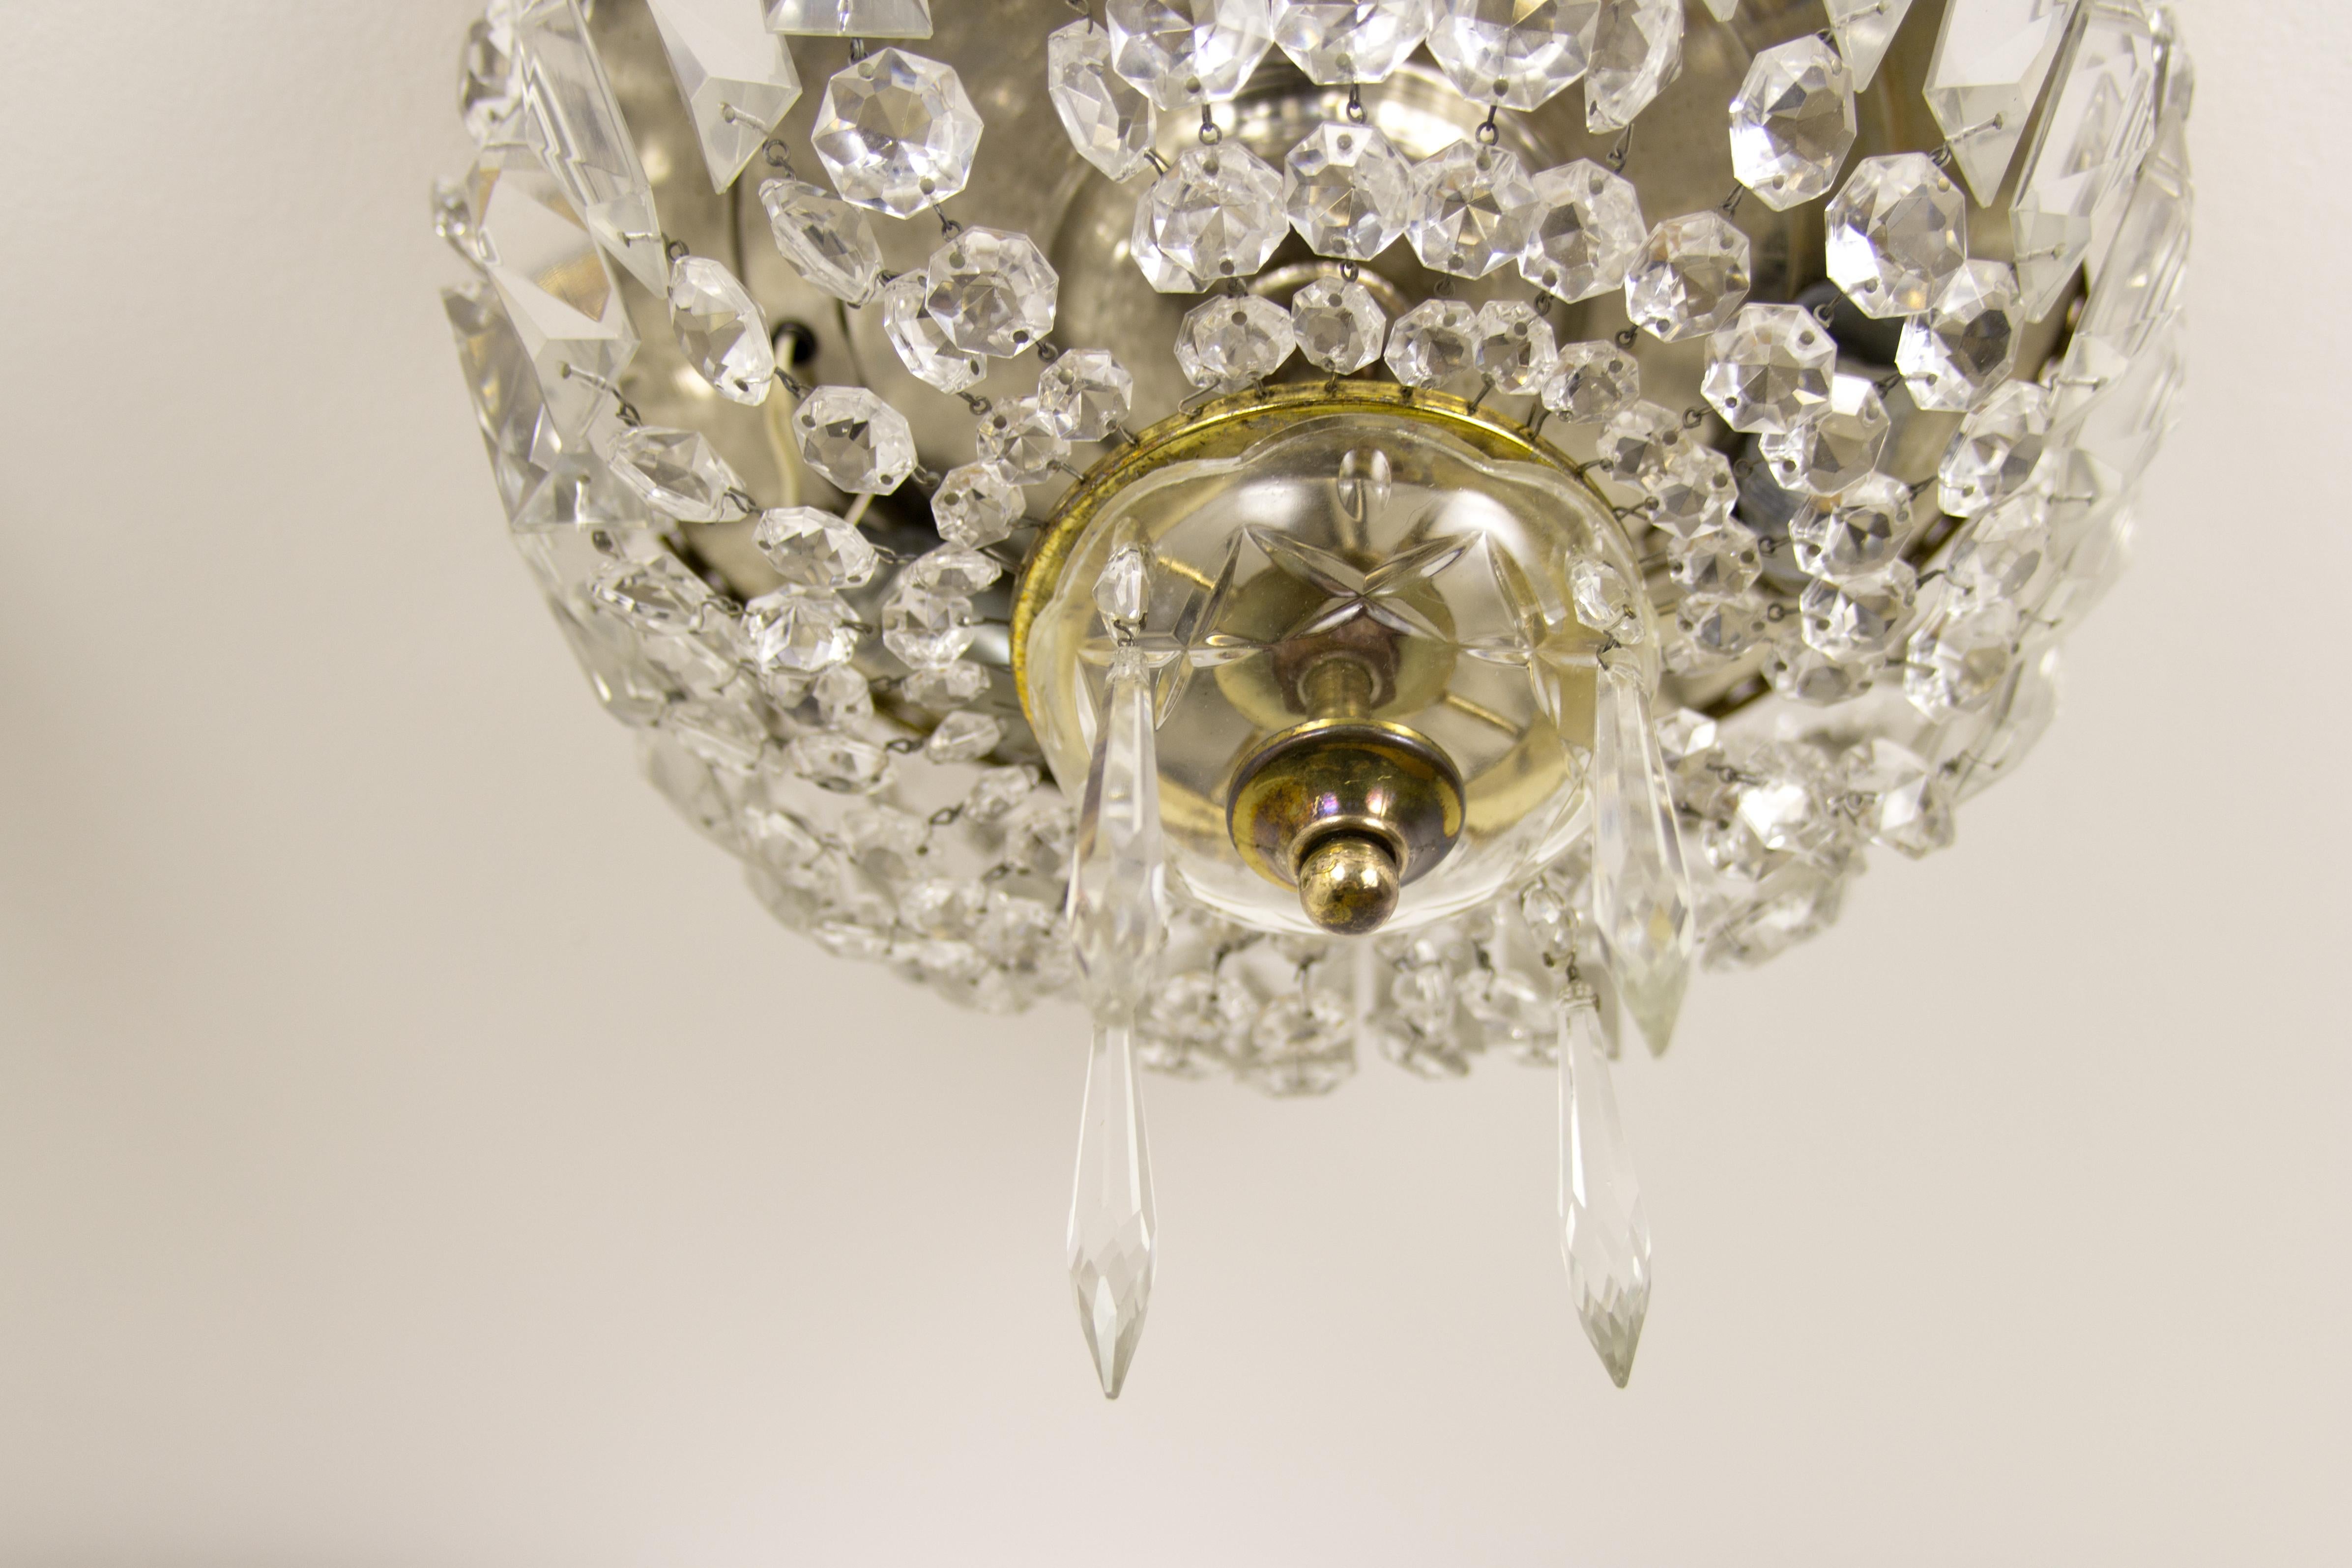 A pair of classic crystal glass and brass ceiling fixtures or flush mounts. Brass fitting decorated with glass diamonds, prism plates, and icicles.
The crystal shades will beautifully sparkle when the light is on. These elegant three-light fixtures